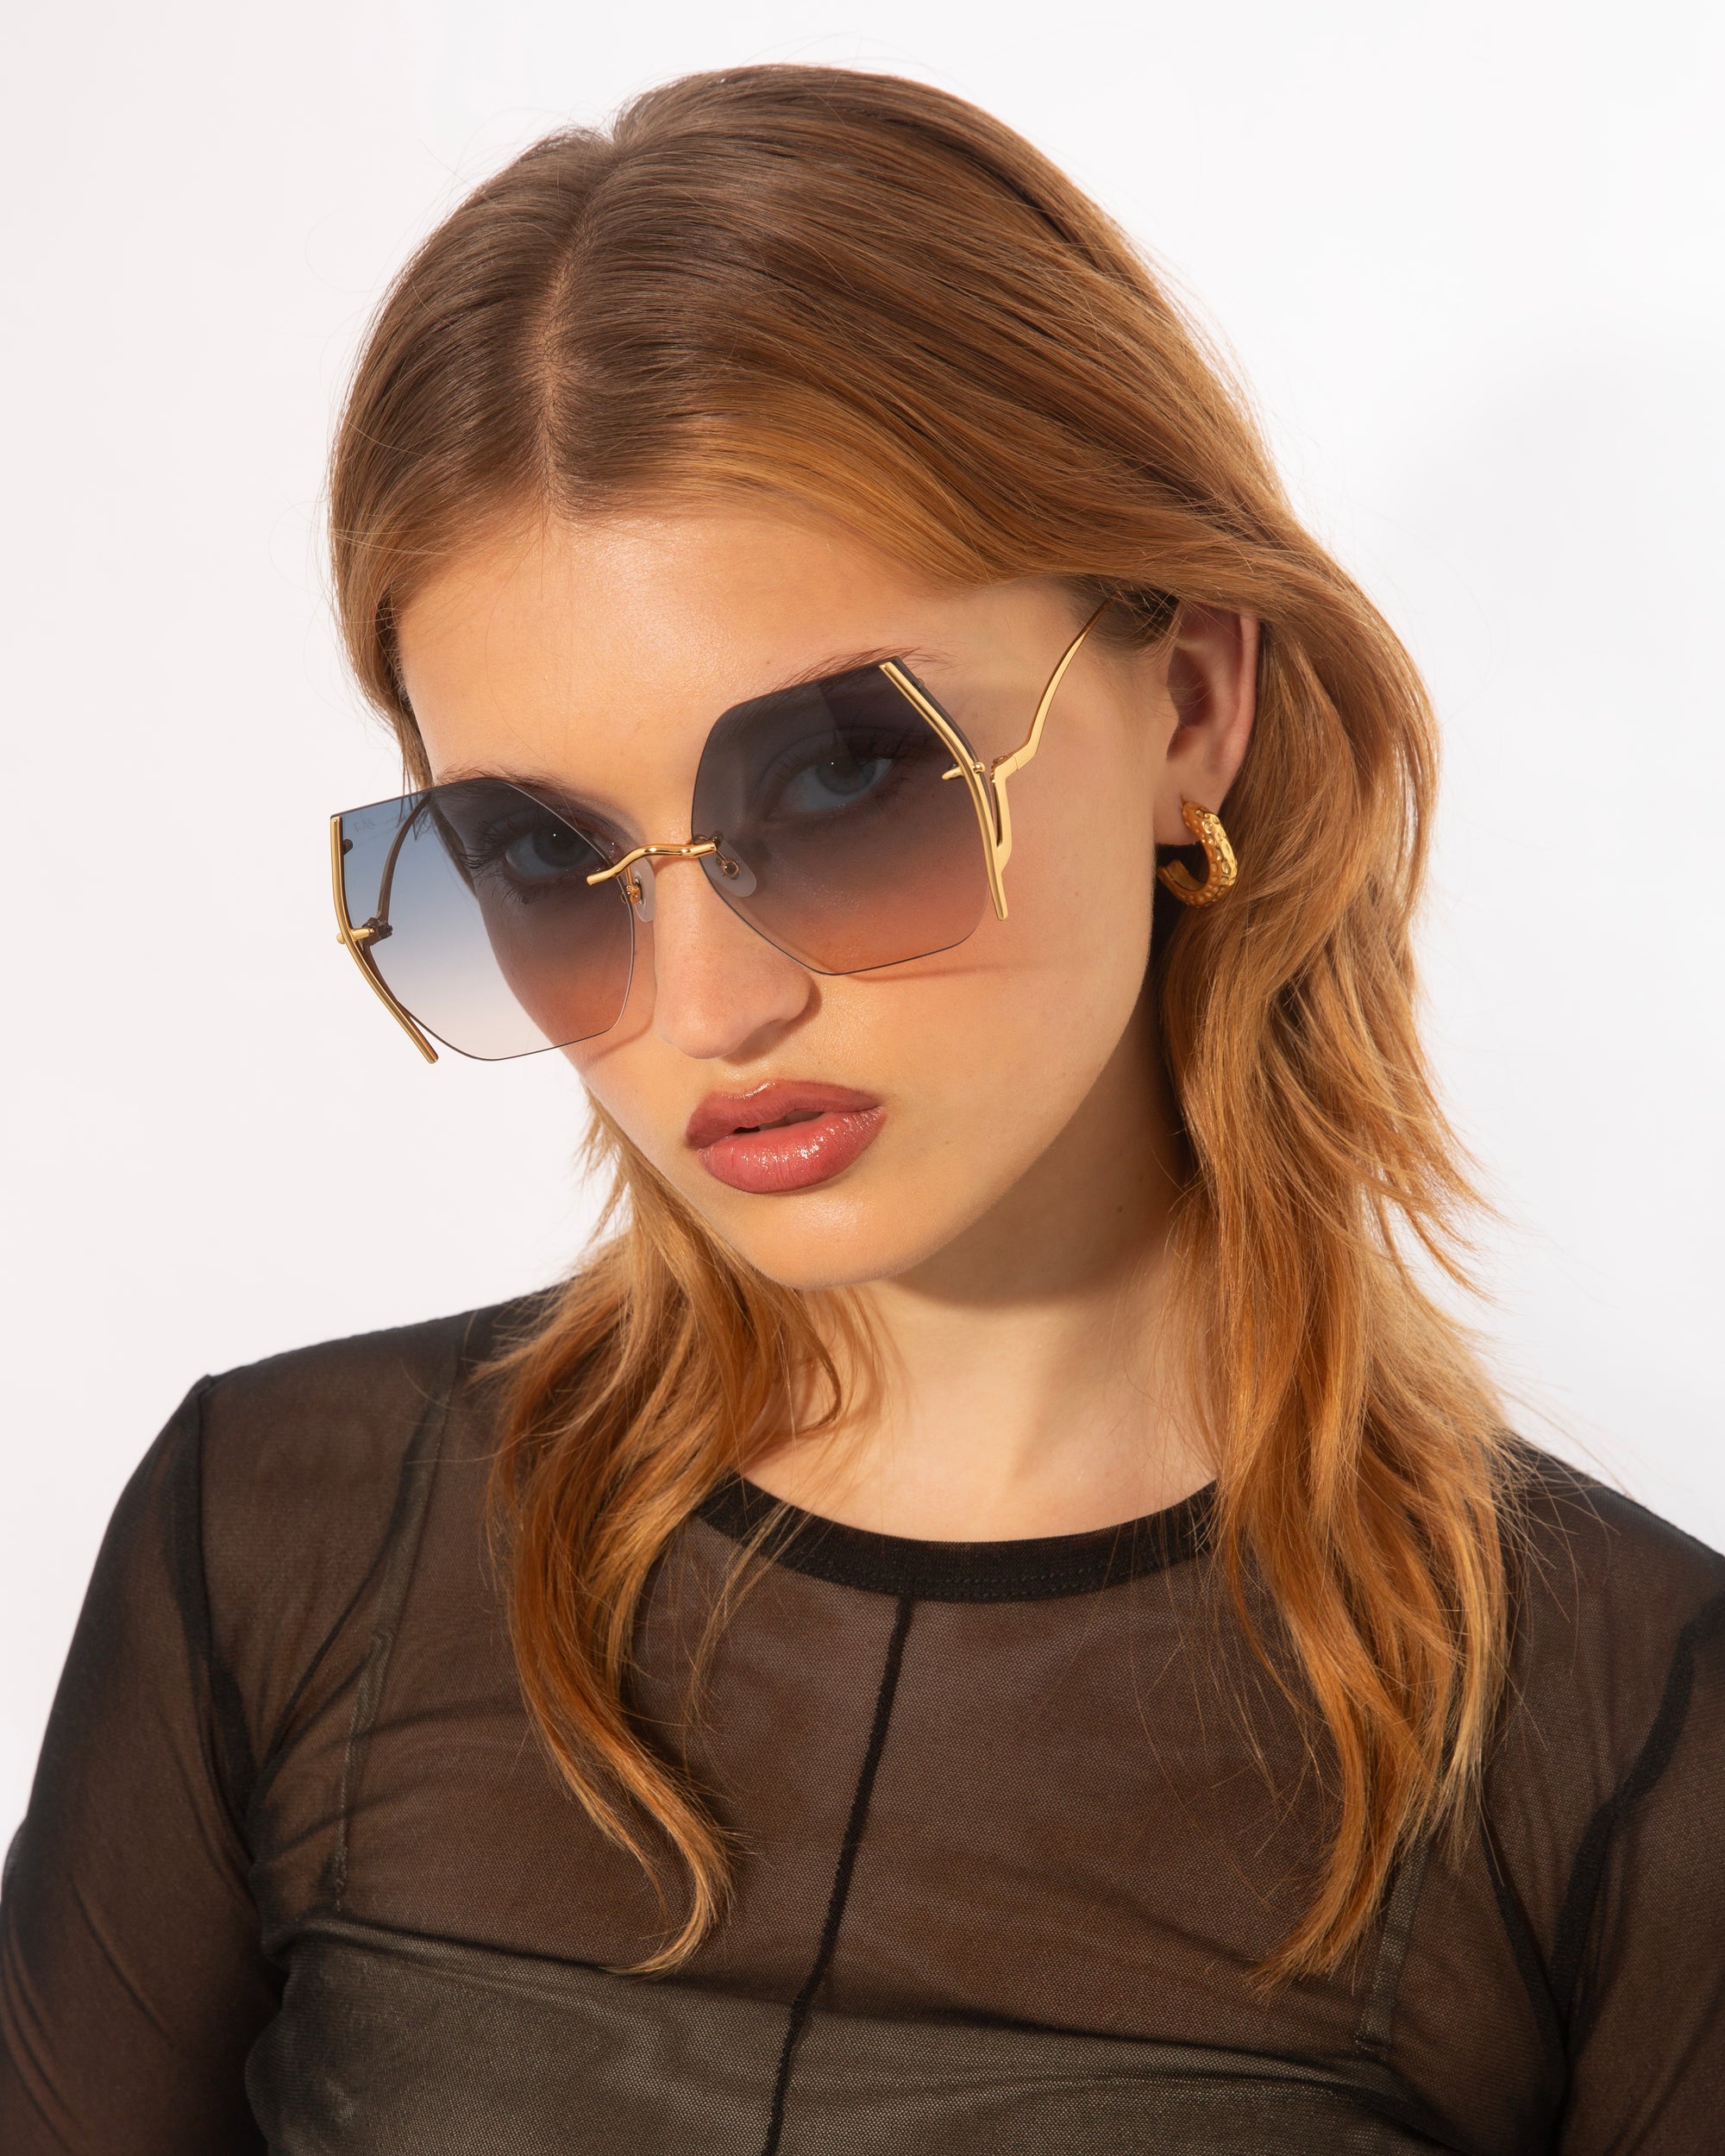 A woman with straight, auburn hair wears oversized, geometric sunglasses named Generation by For Art&#39;s Sake®, featuring gradient lenses and gold-plated stainless steel frames with jadestone nosepads for added comfort and UV protection. She has gold hoop earrings and is dressed in a black, sheer long-sleeve top. The background is plain white.